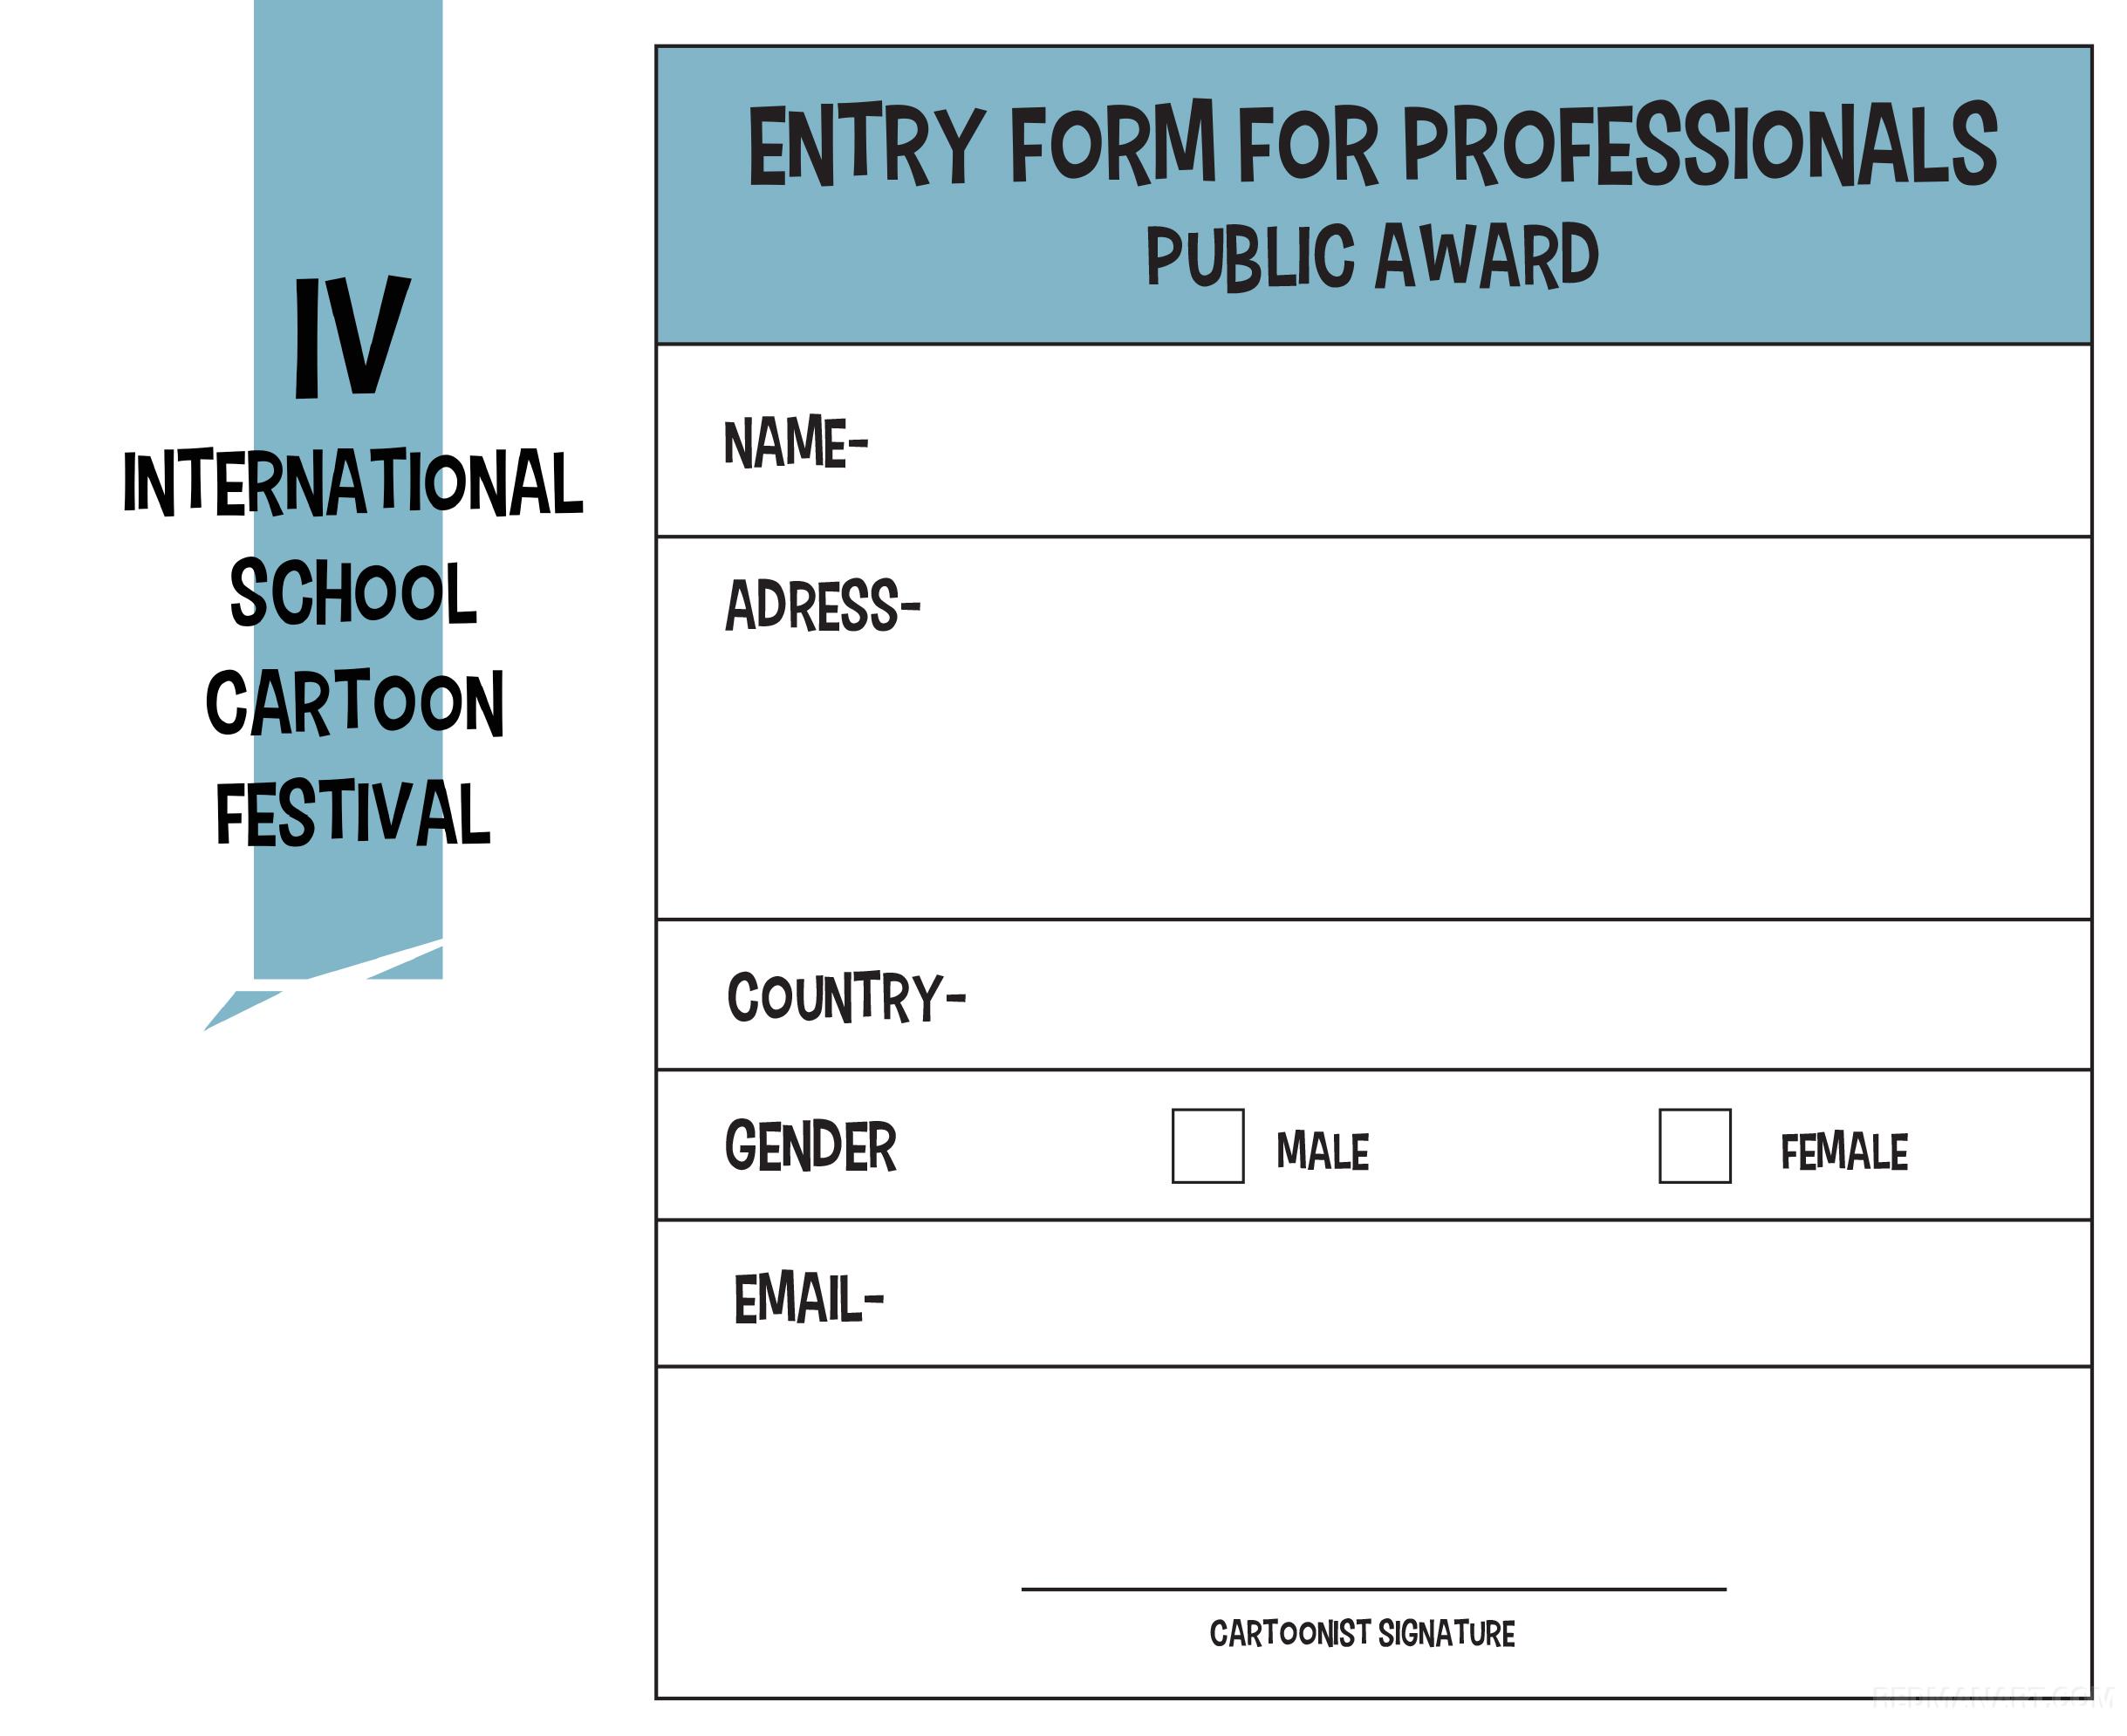 ENTRY FORM PROFESSIONALS.jpg